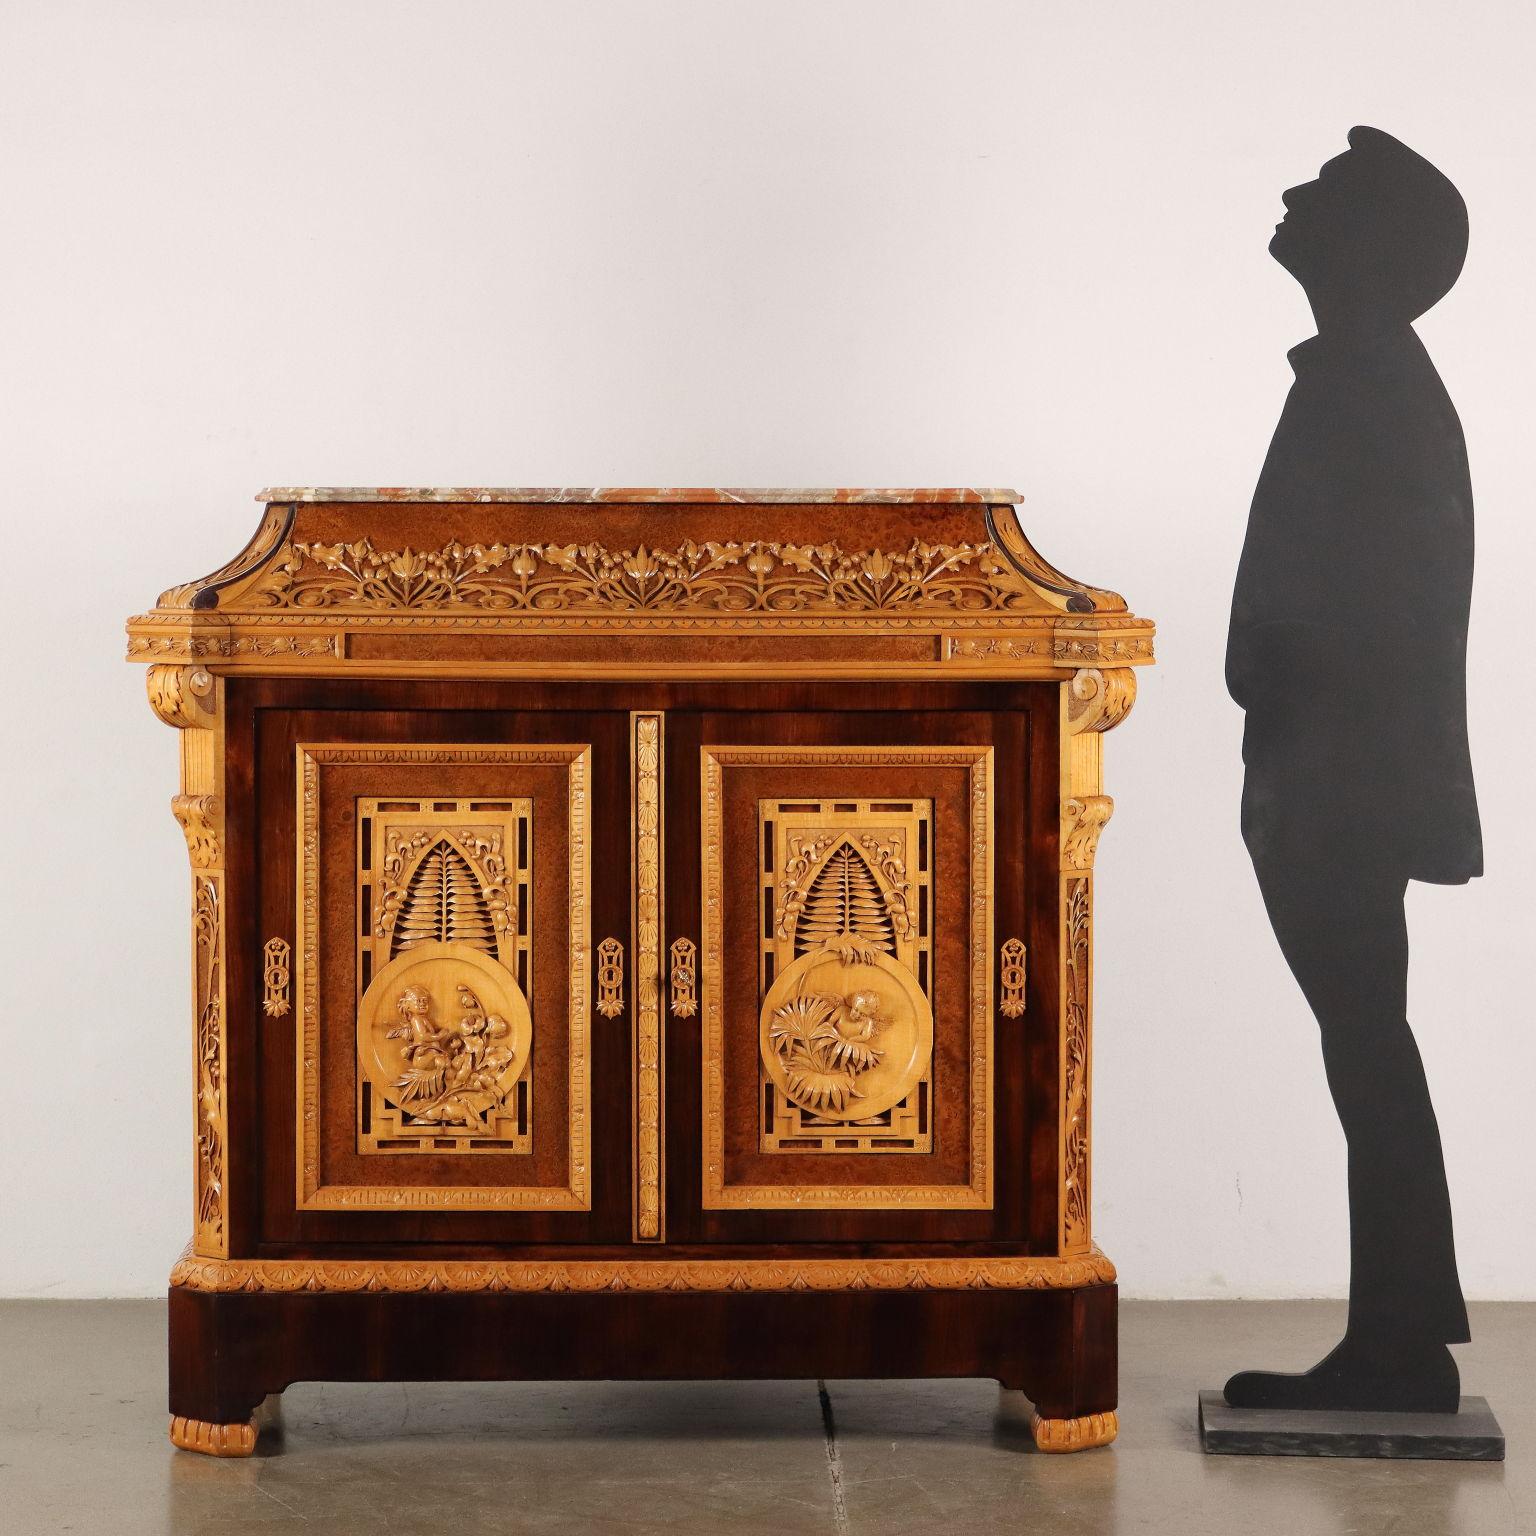 Carved sideboard with urn-shaped riser, antique breccia top, front with two doors, uprights at 45 degrees. The whole structure of the piece of furniture is veneered with Indian walnut, thuya briar and is richly carved with maple worked with floral